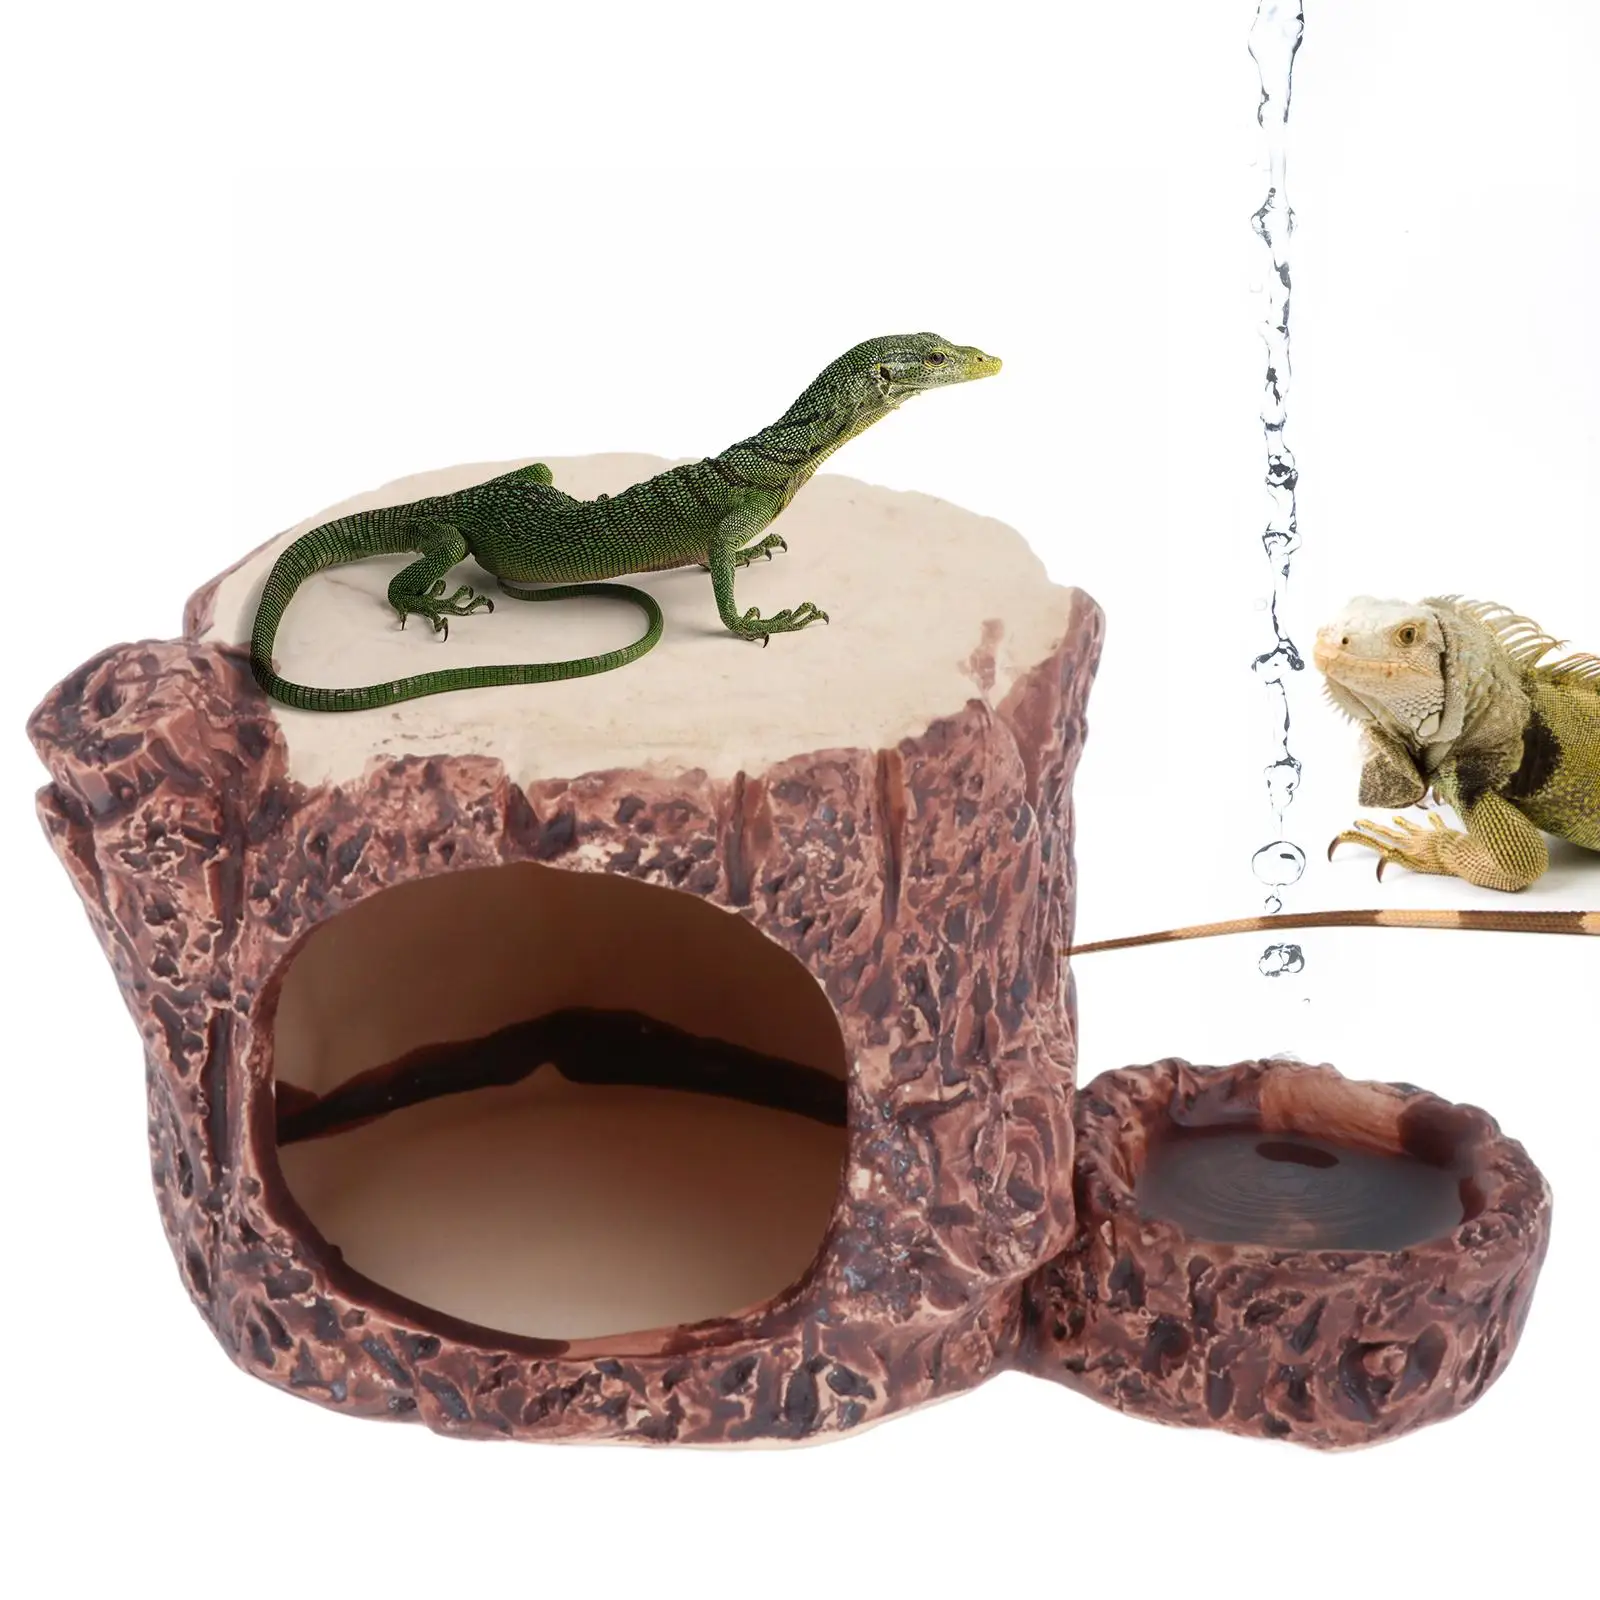 Hamster Houses Hideout Landscaping Hut Bath Toy Summer Habitat for Other Amphibians Small Animals Chameleons Tree Frogs